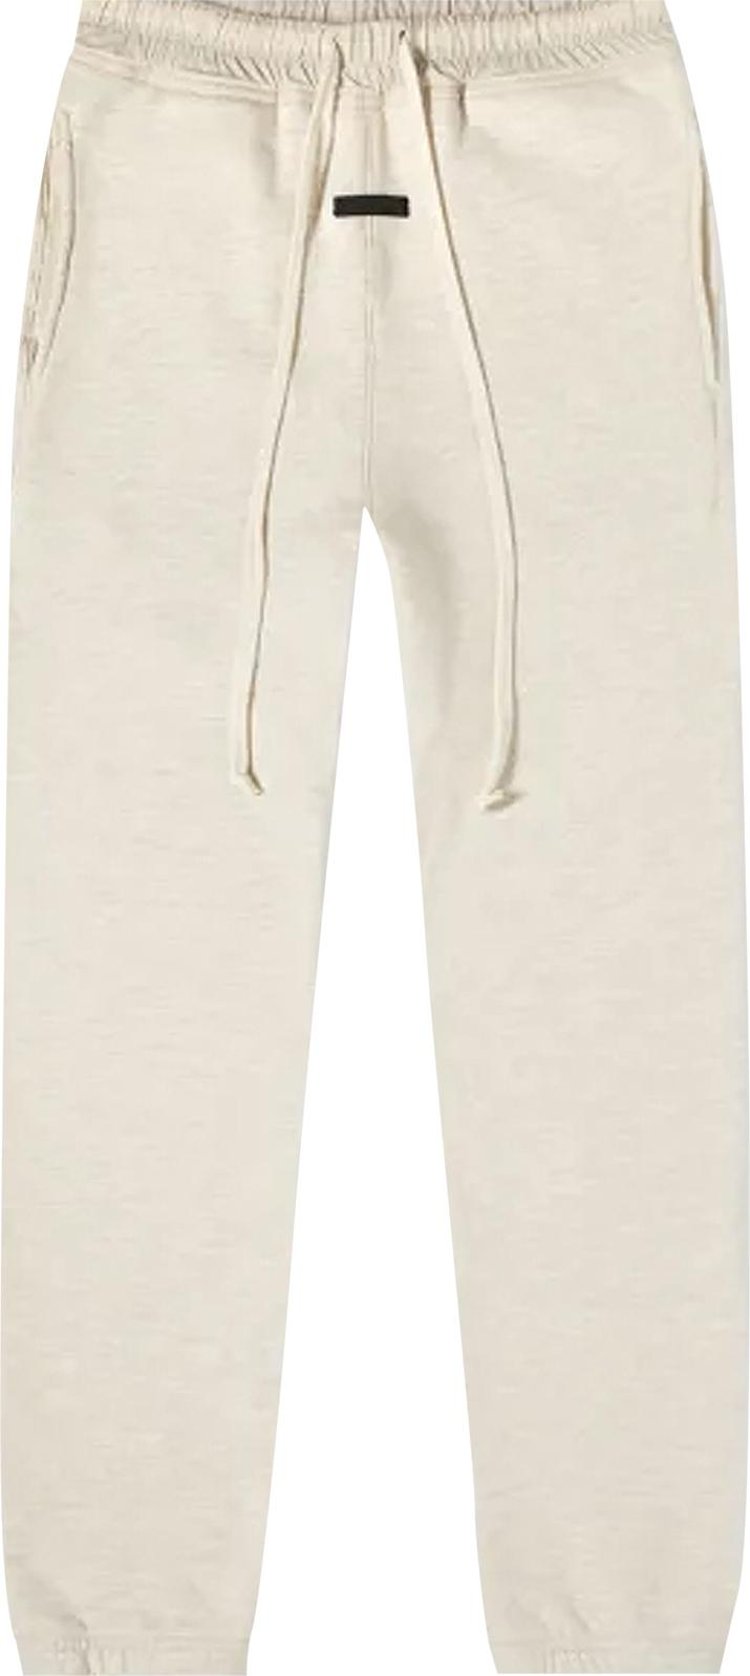 Buy Fear of God The Vintage Sweatpant 'Heather Cream' - FG40 007OFL ...